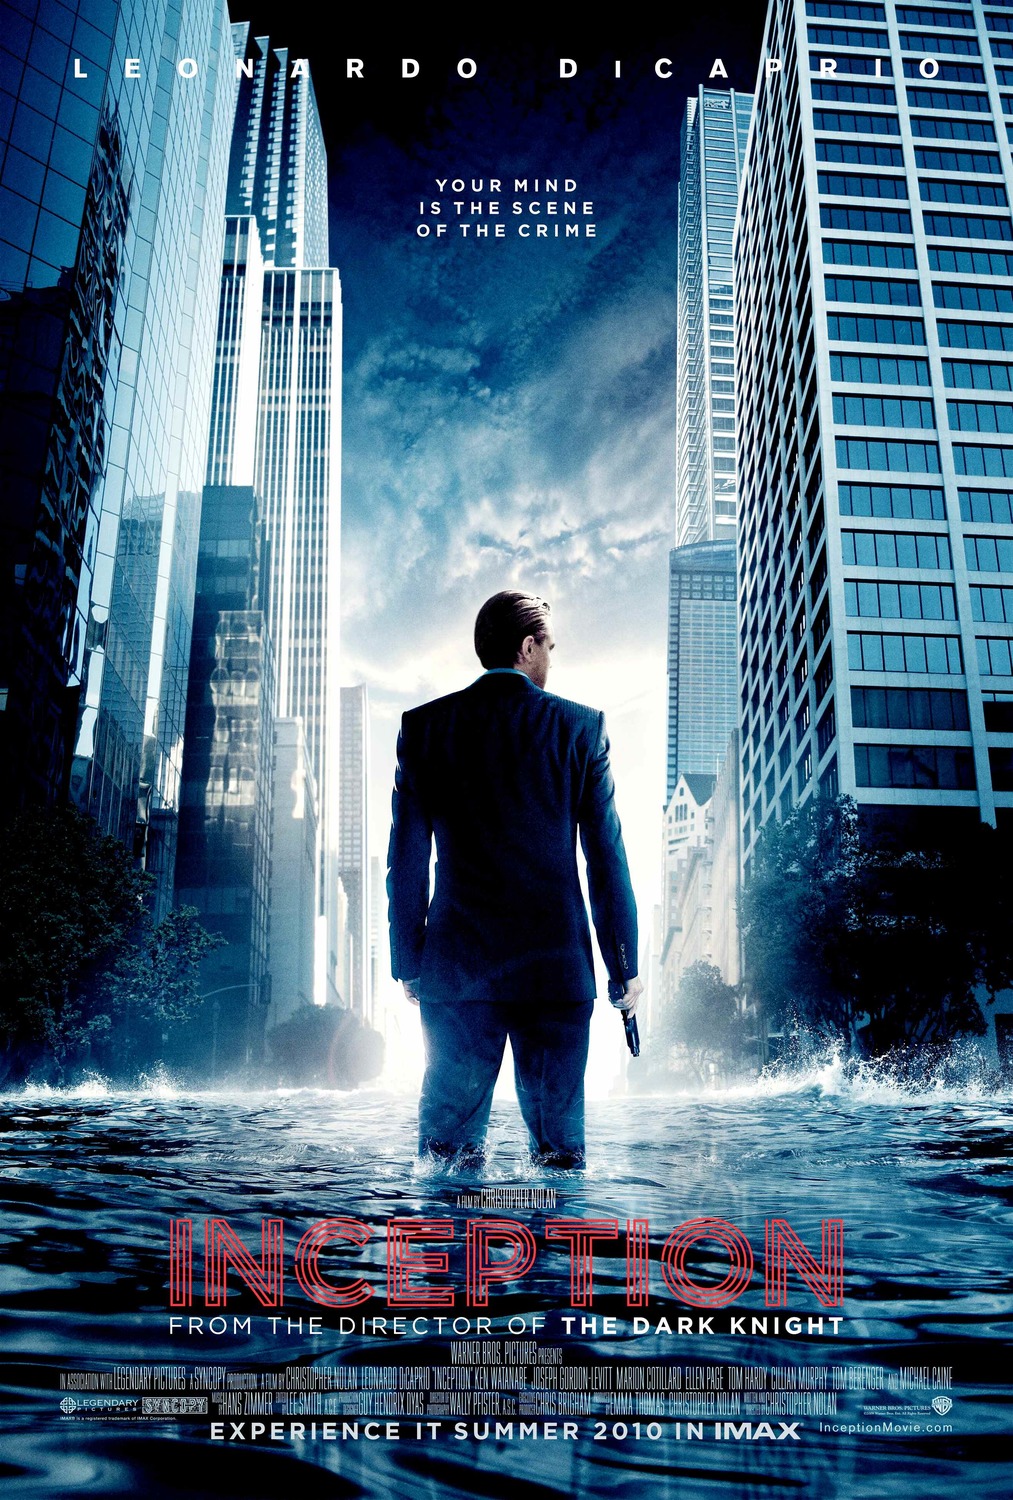 Reprint Inception Movie Poster 13 x 19